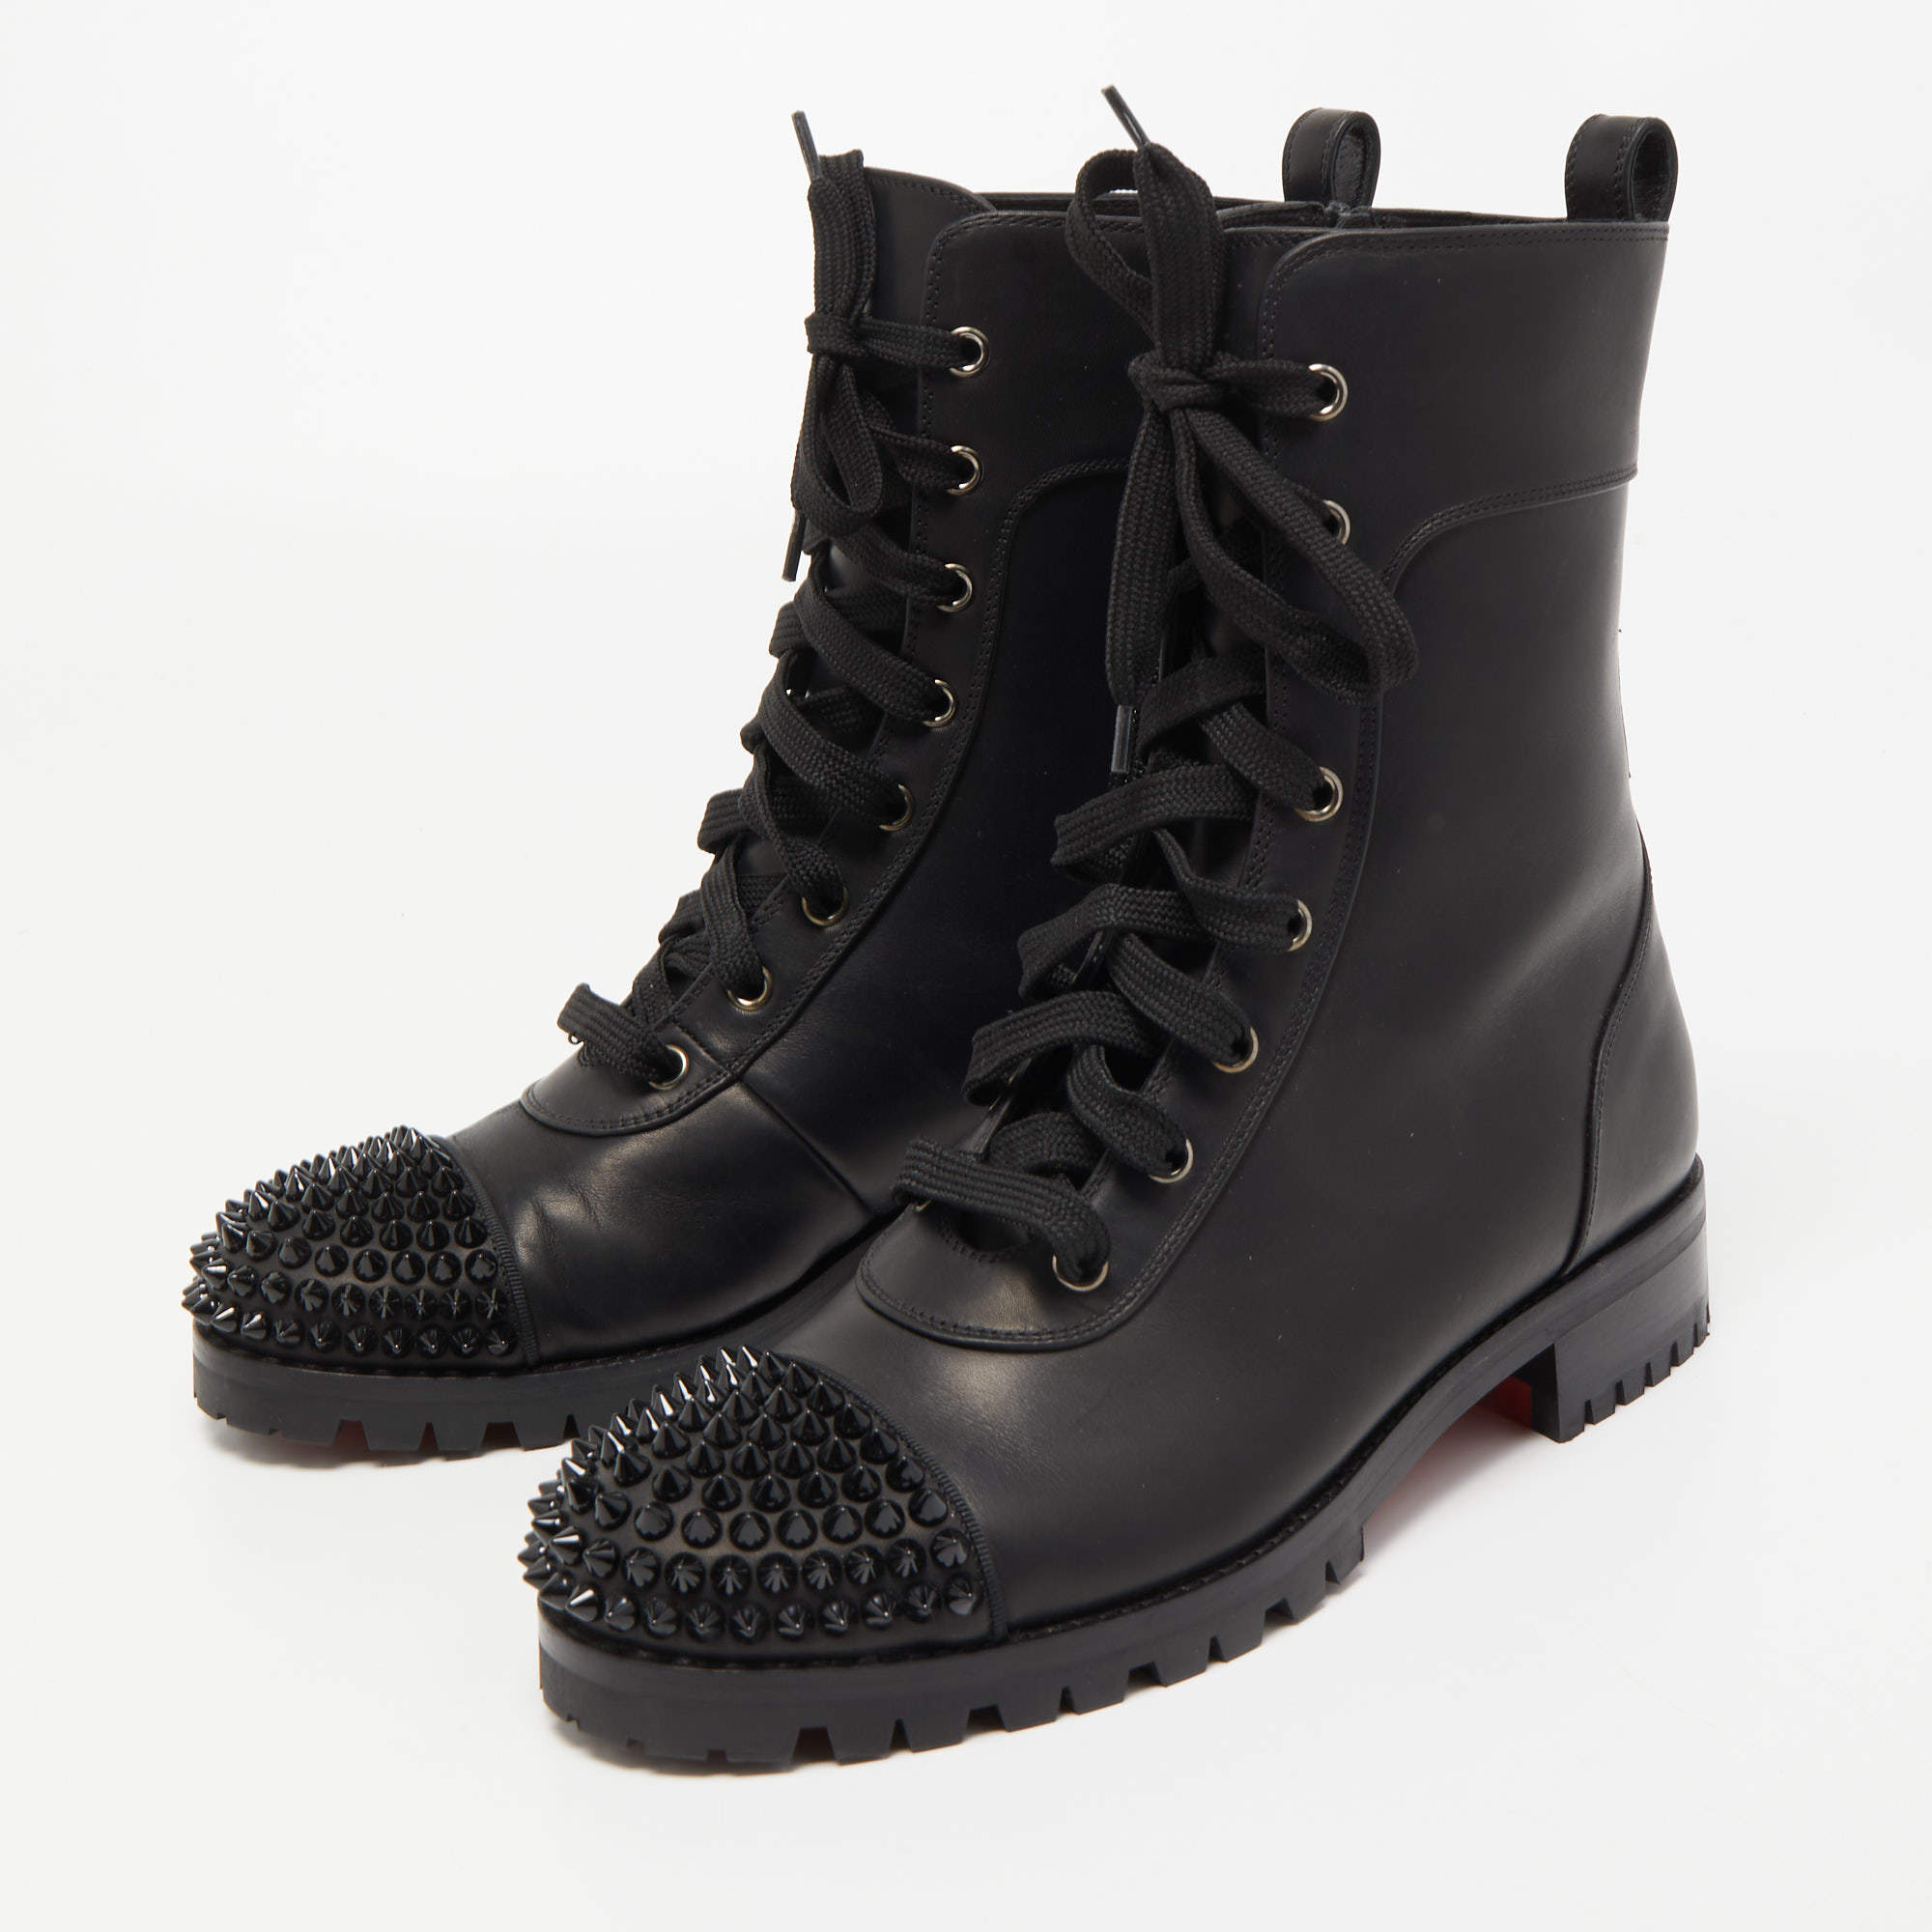 Christian Louboutin Black Leather TS Croc Spikes Ankle Length Boots Size  37.5 Christian Louboutin